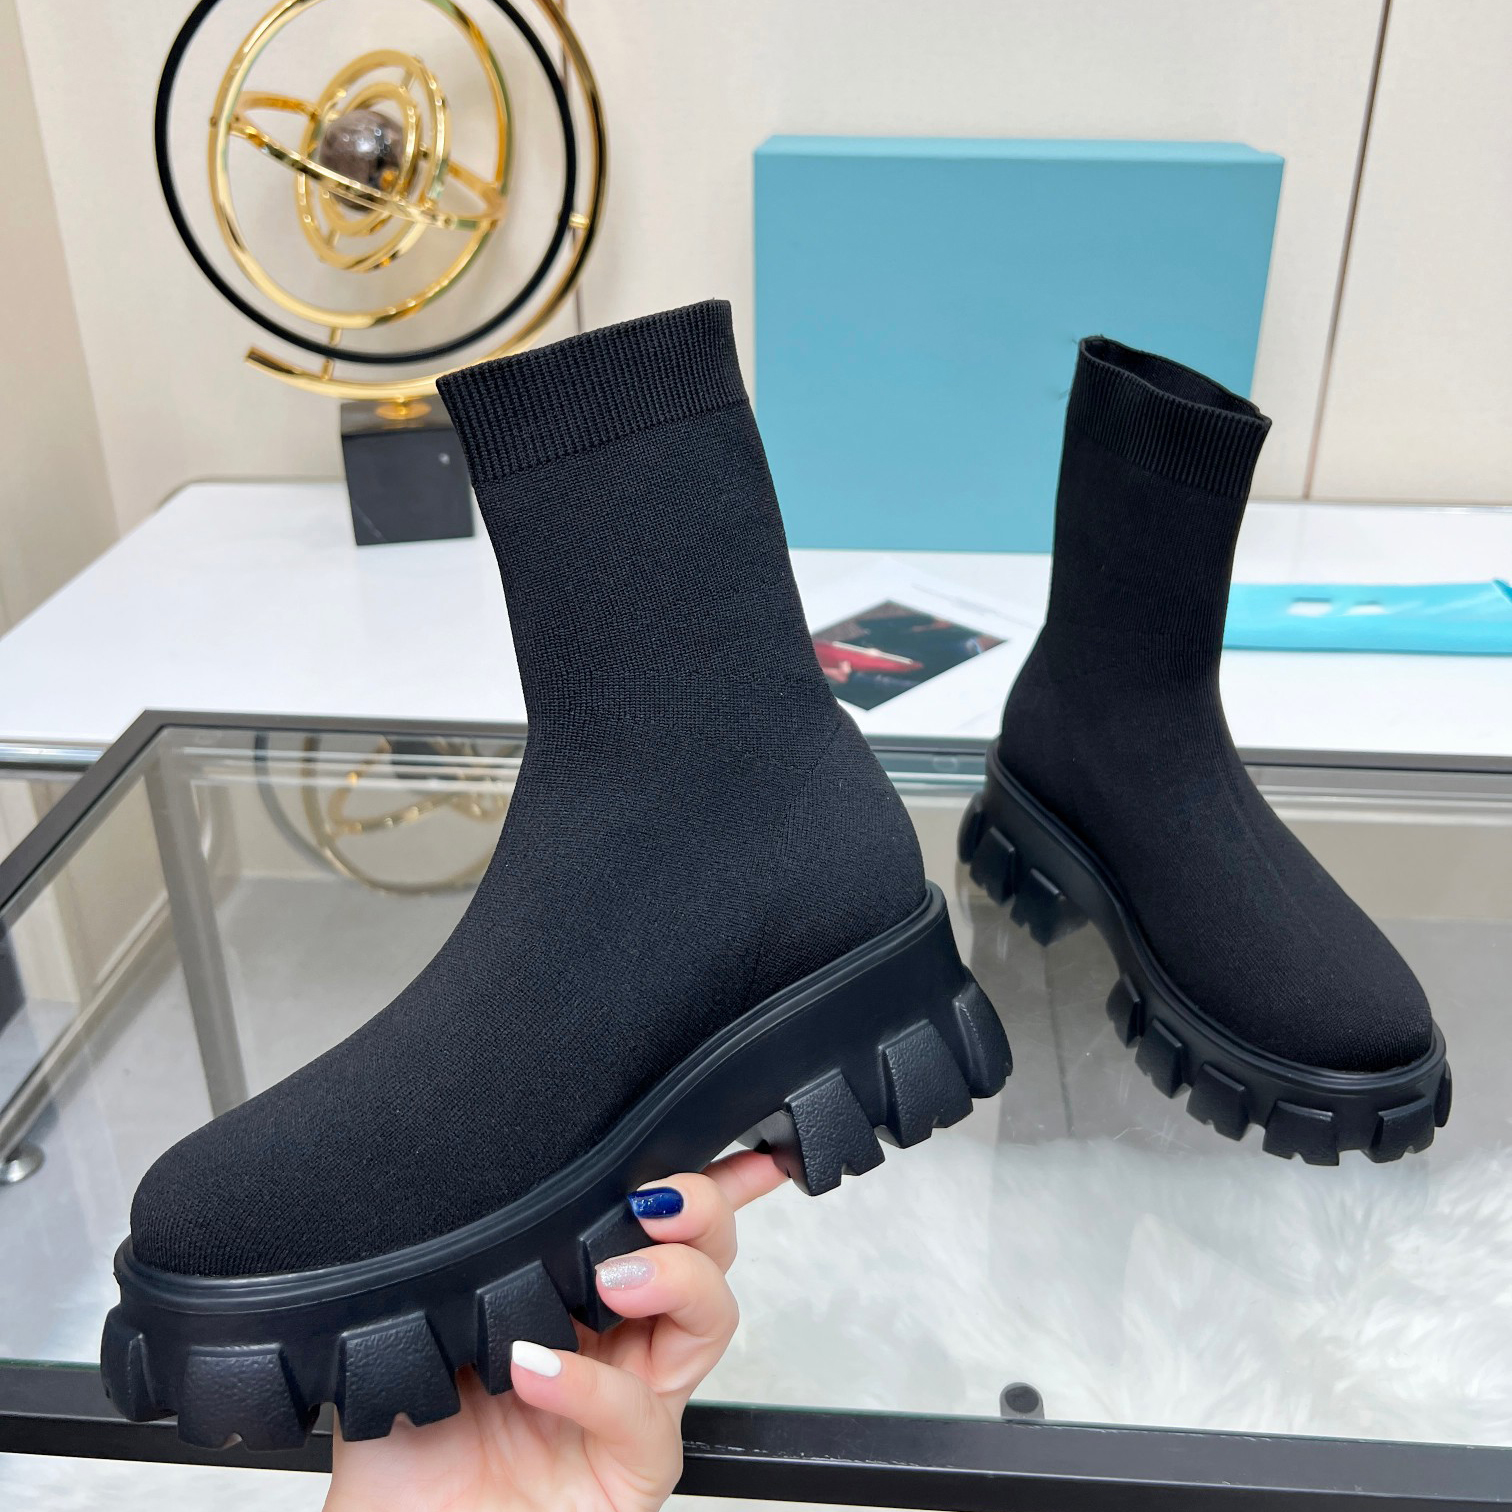 Designer Women Sock Boots Leather Chelsea Lår Ankel Luxury Boots Full Grain Leather Stretch Platform Slip-ons Round Toe Shoes Lady Outdoor Girls Flat Booties